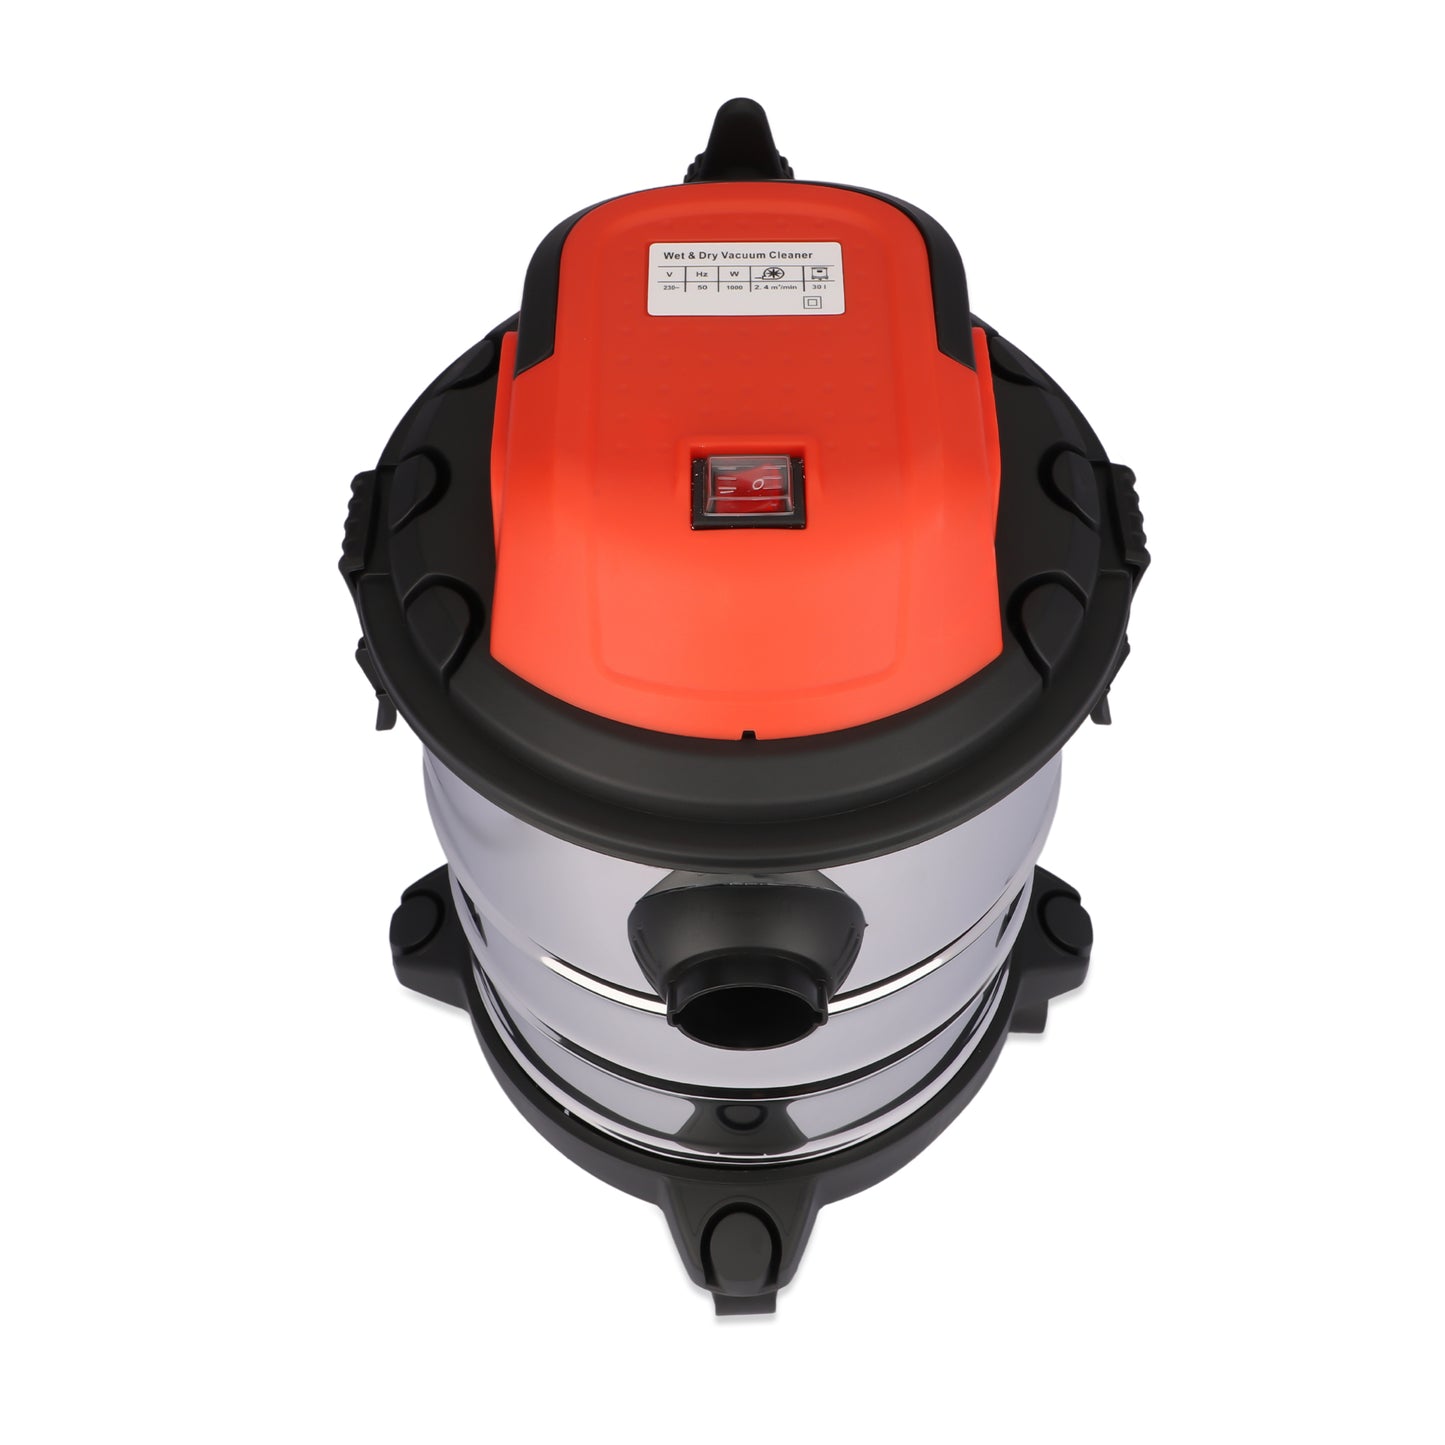 STARQ Wet and Dry Vacuum Cleaner for Home| 1000 Watt & 17 Kpa Suction |3in1 Multifunction Wet/Dry/Blowing|Break Resistant Tank| 1.5 MTR Hose (30 LTR)